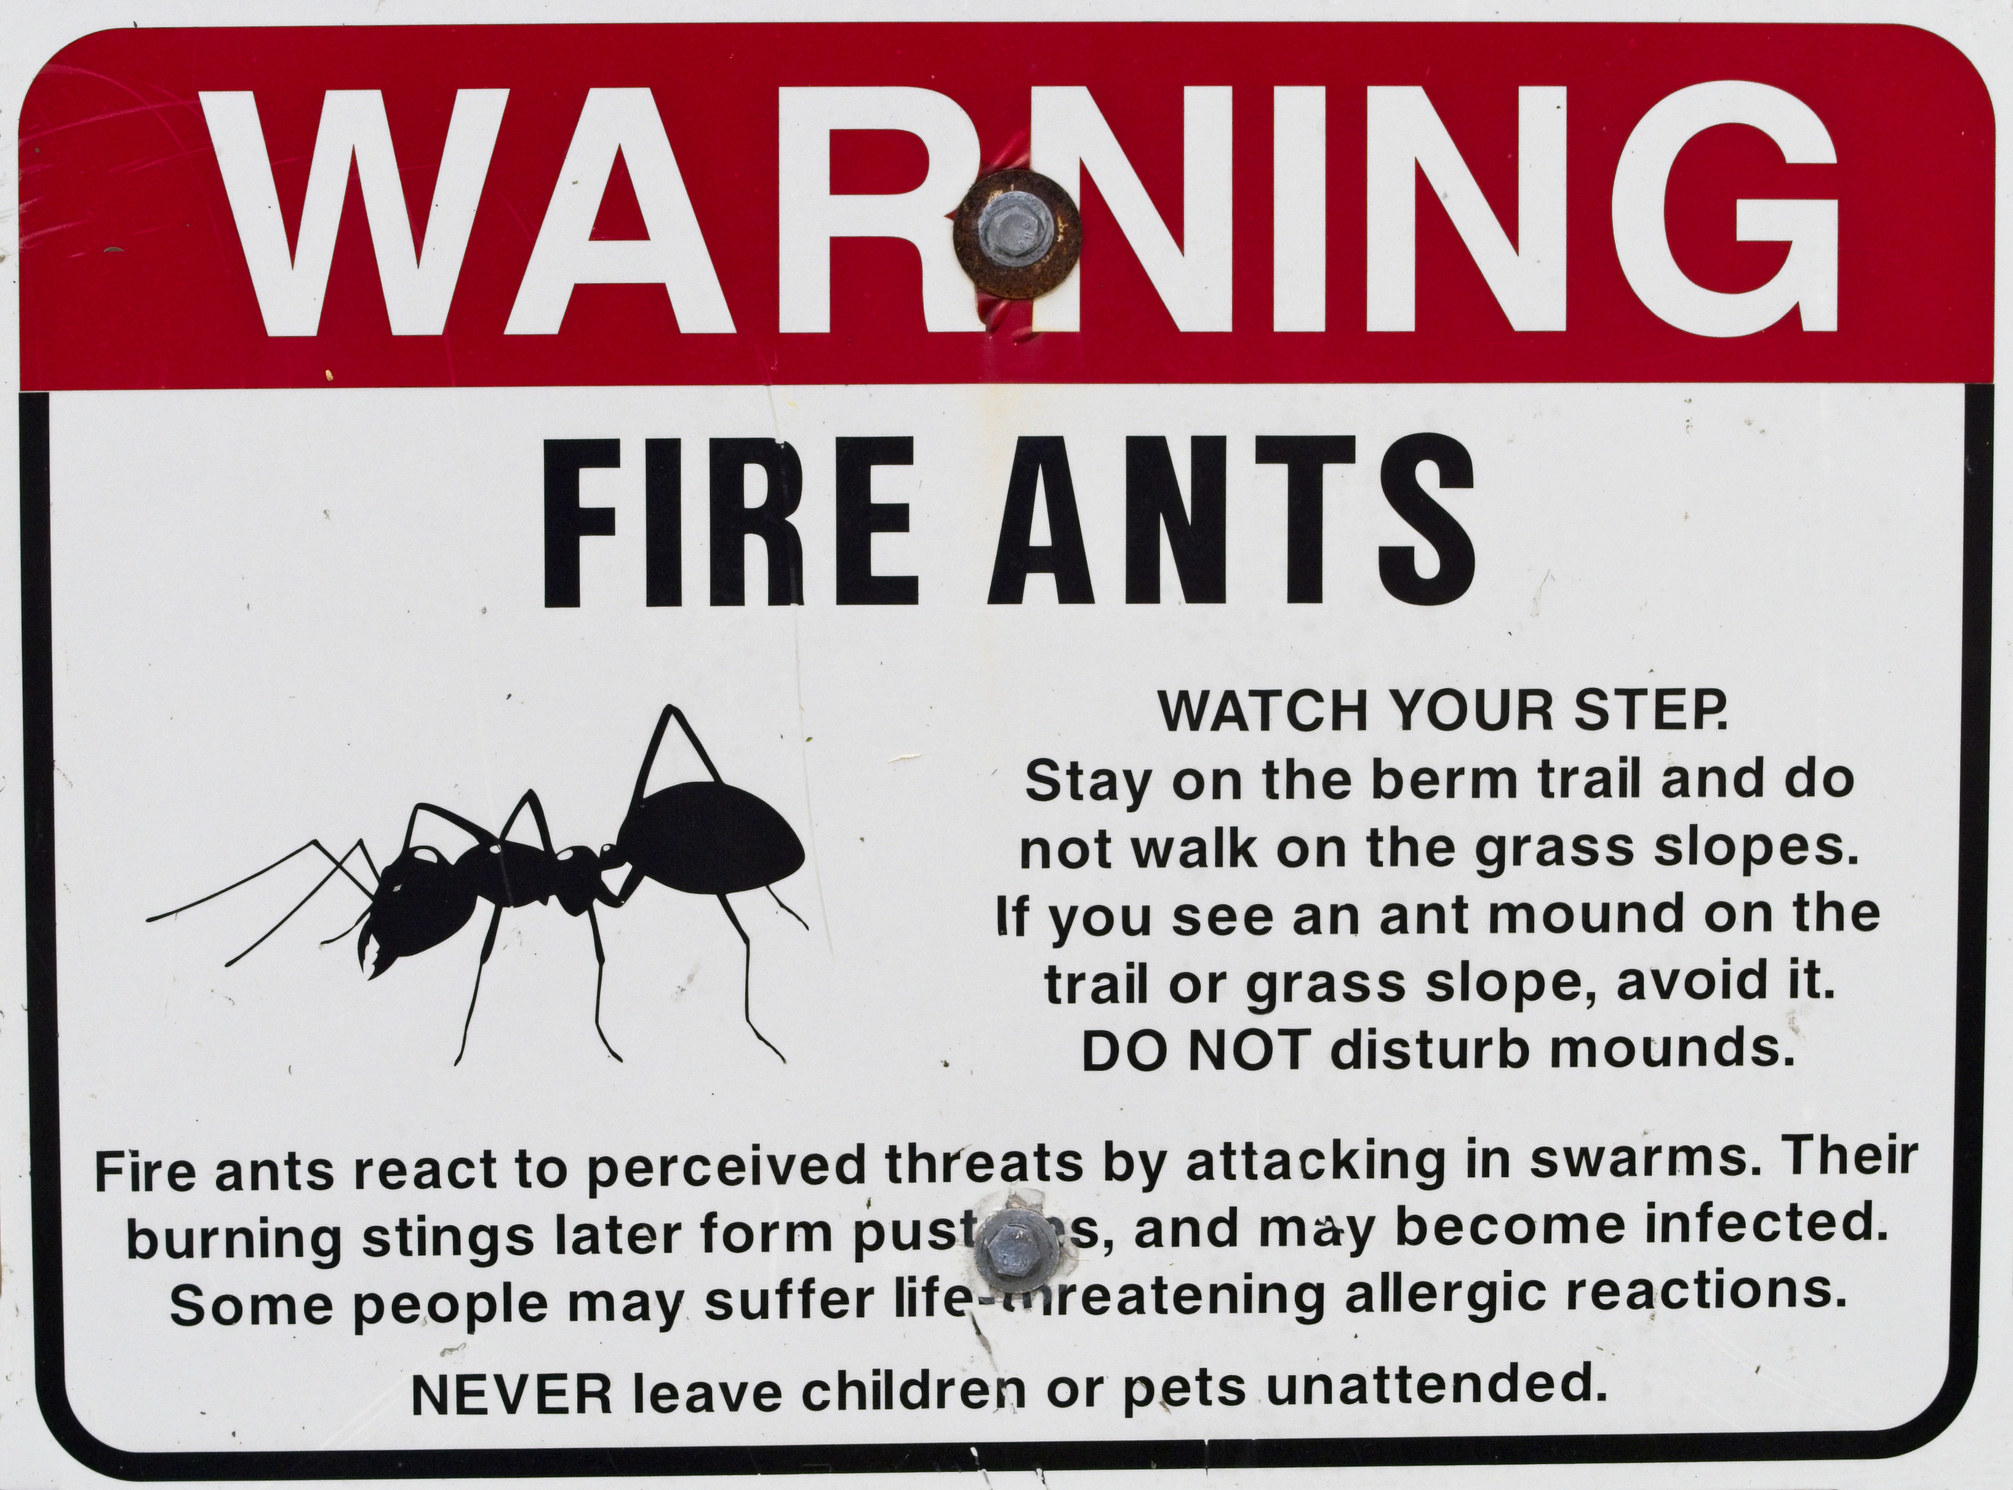 A fire ants sign